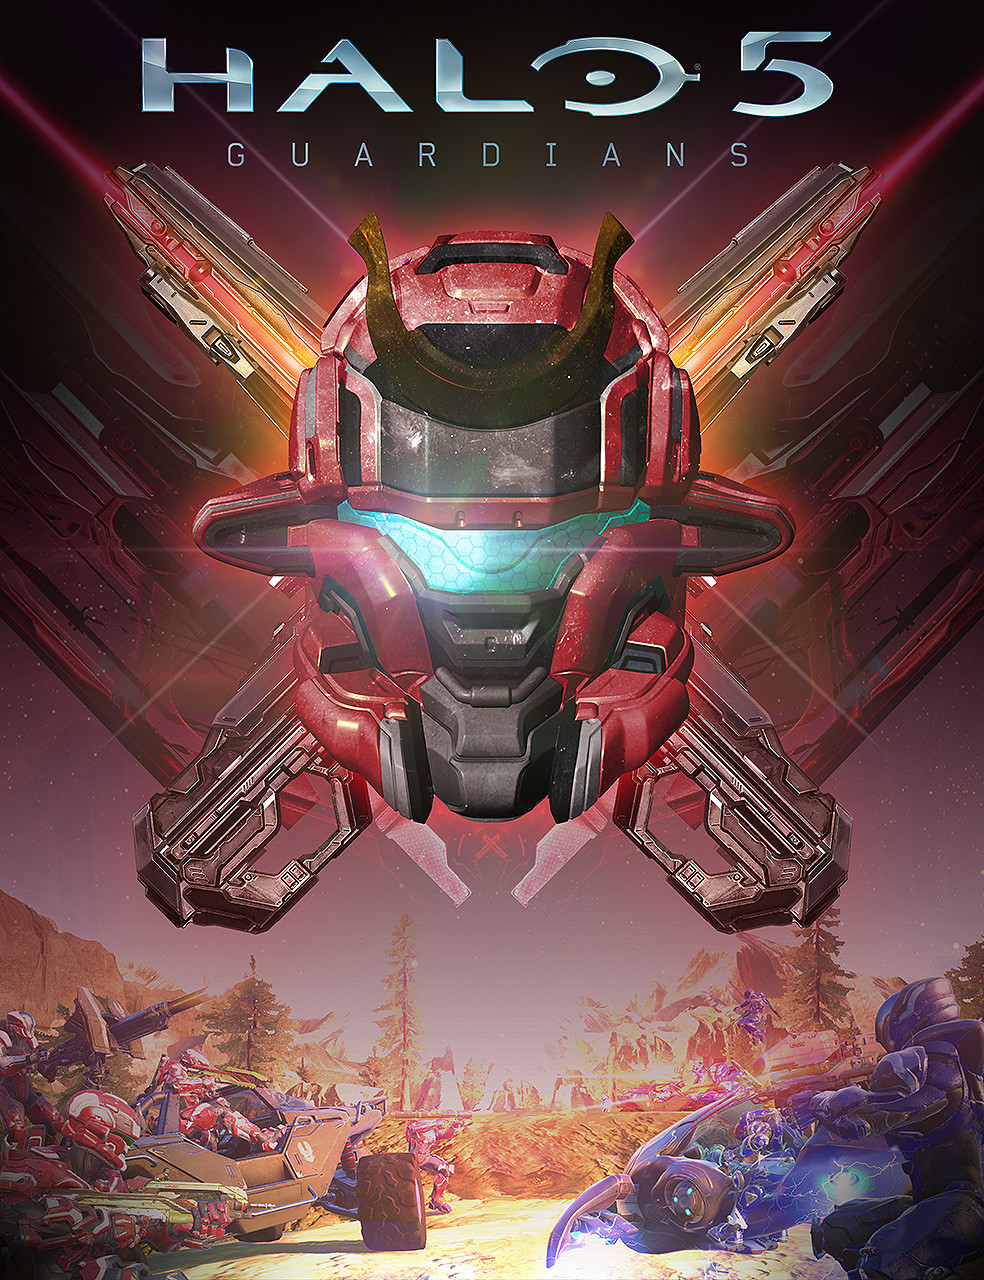 Halo 5 Guardians Poster